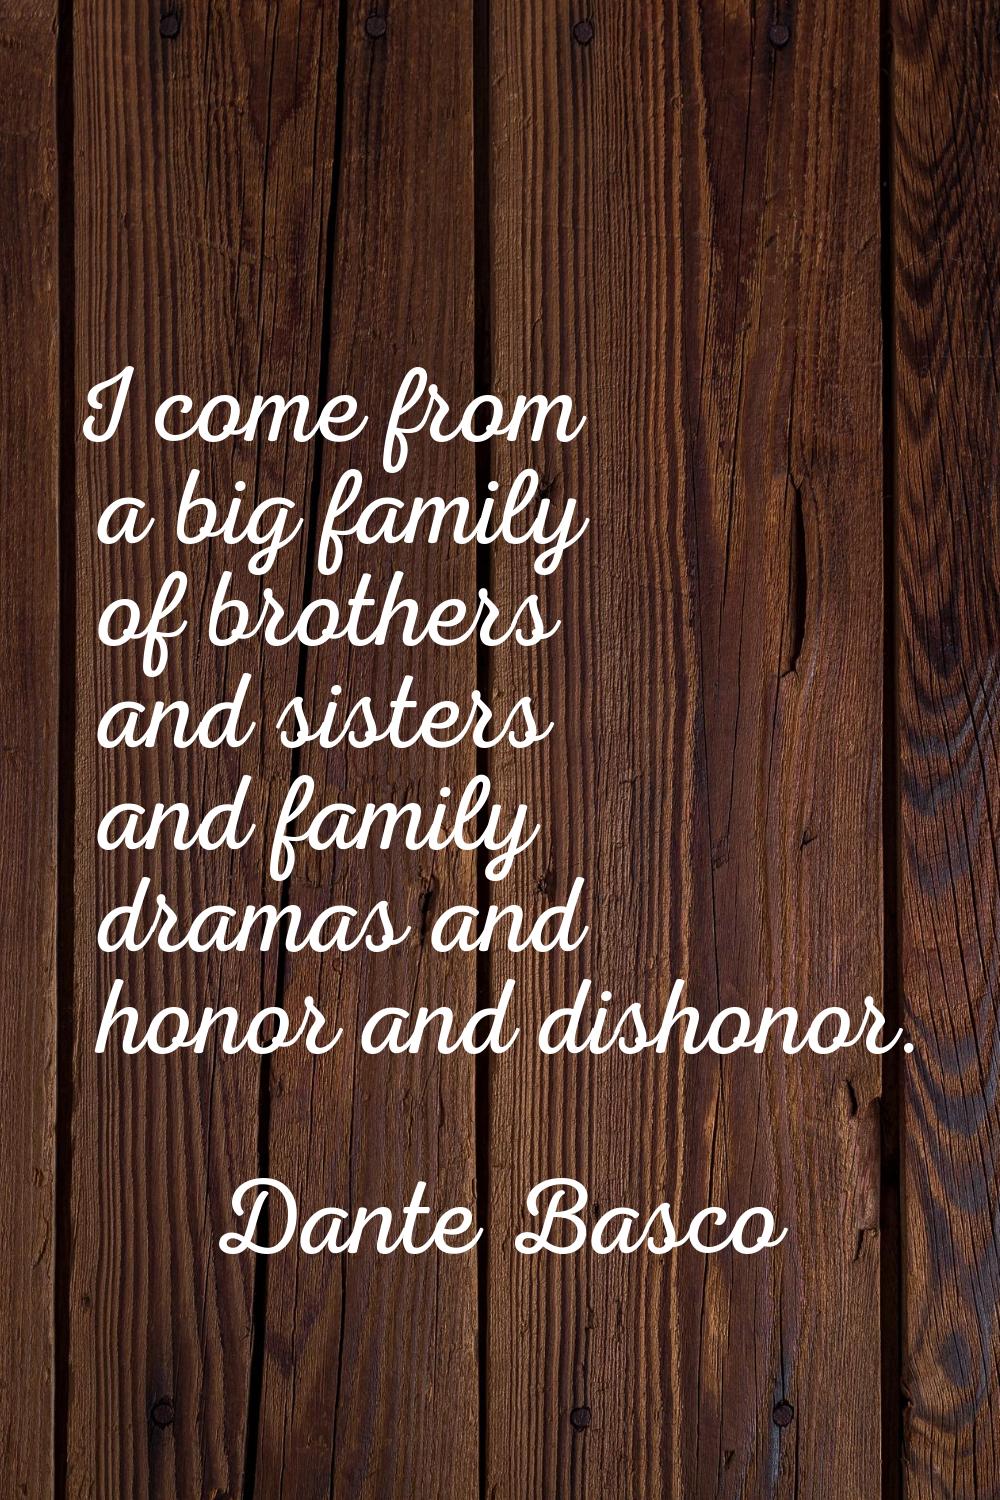 I come from a big family of brothers and sisters and family dramas and honor and dishonor.